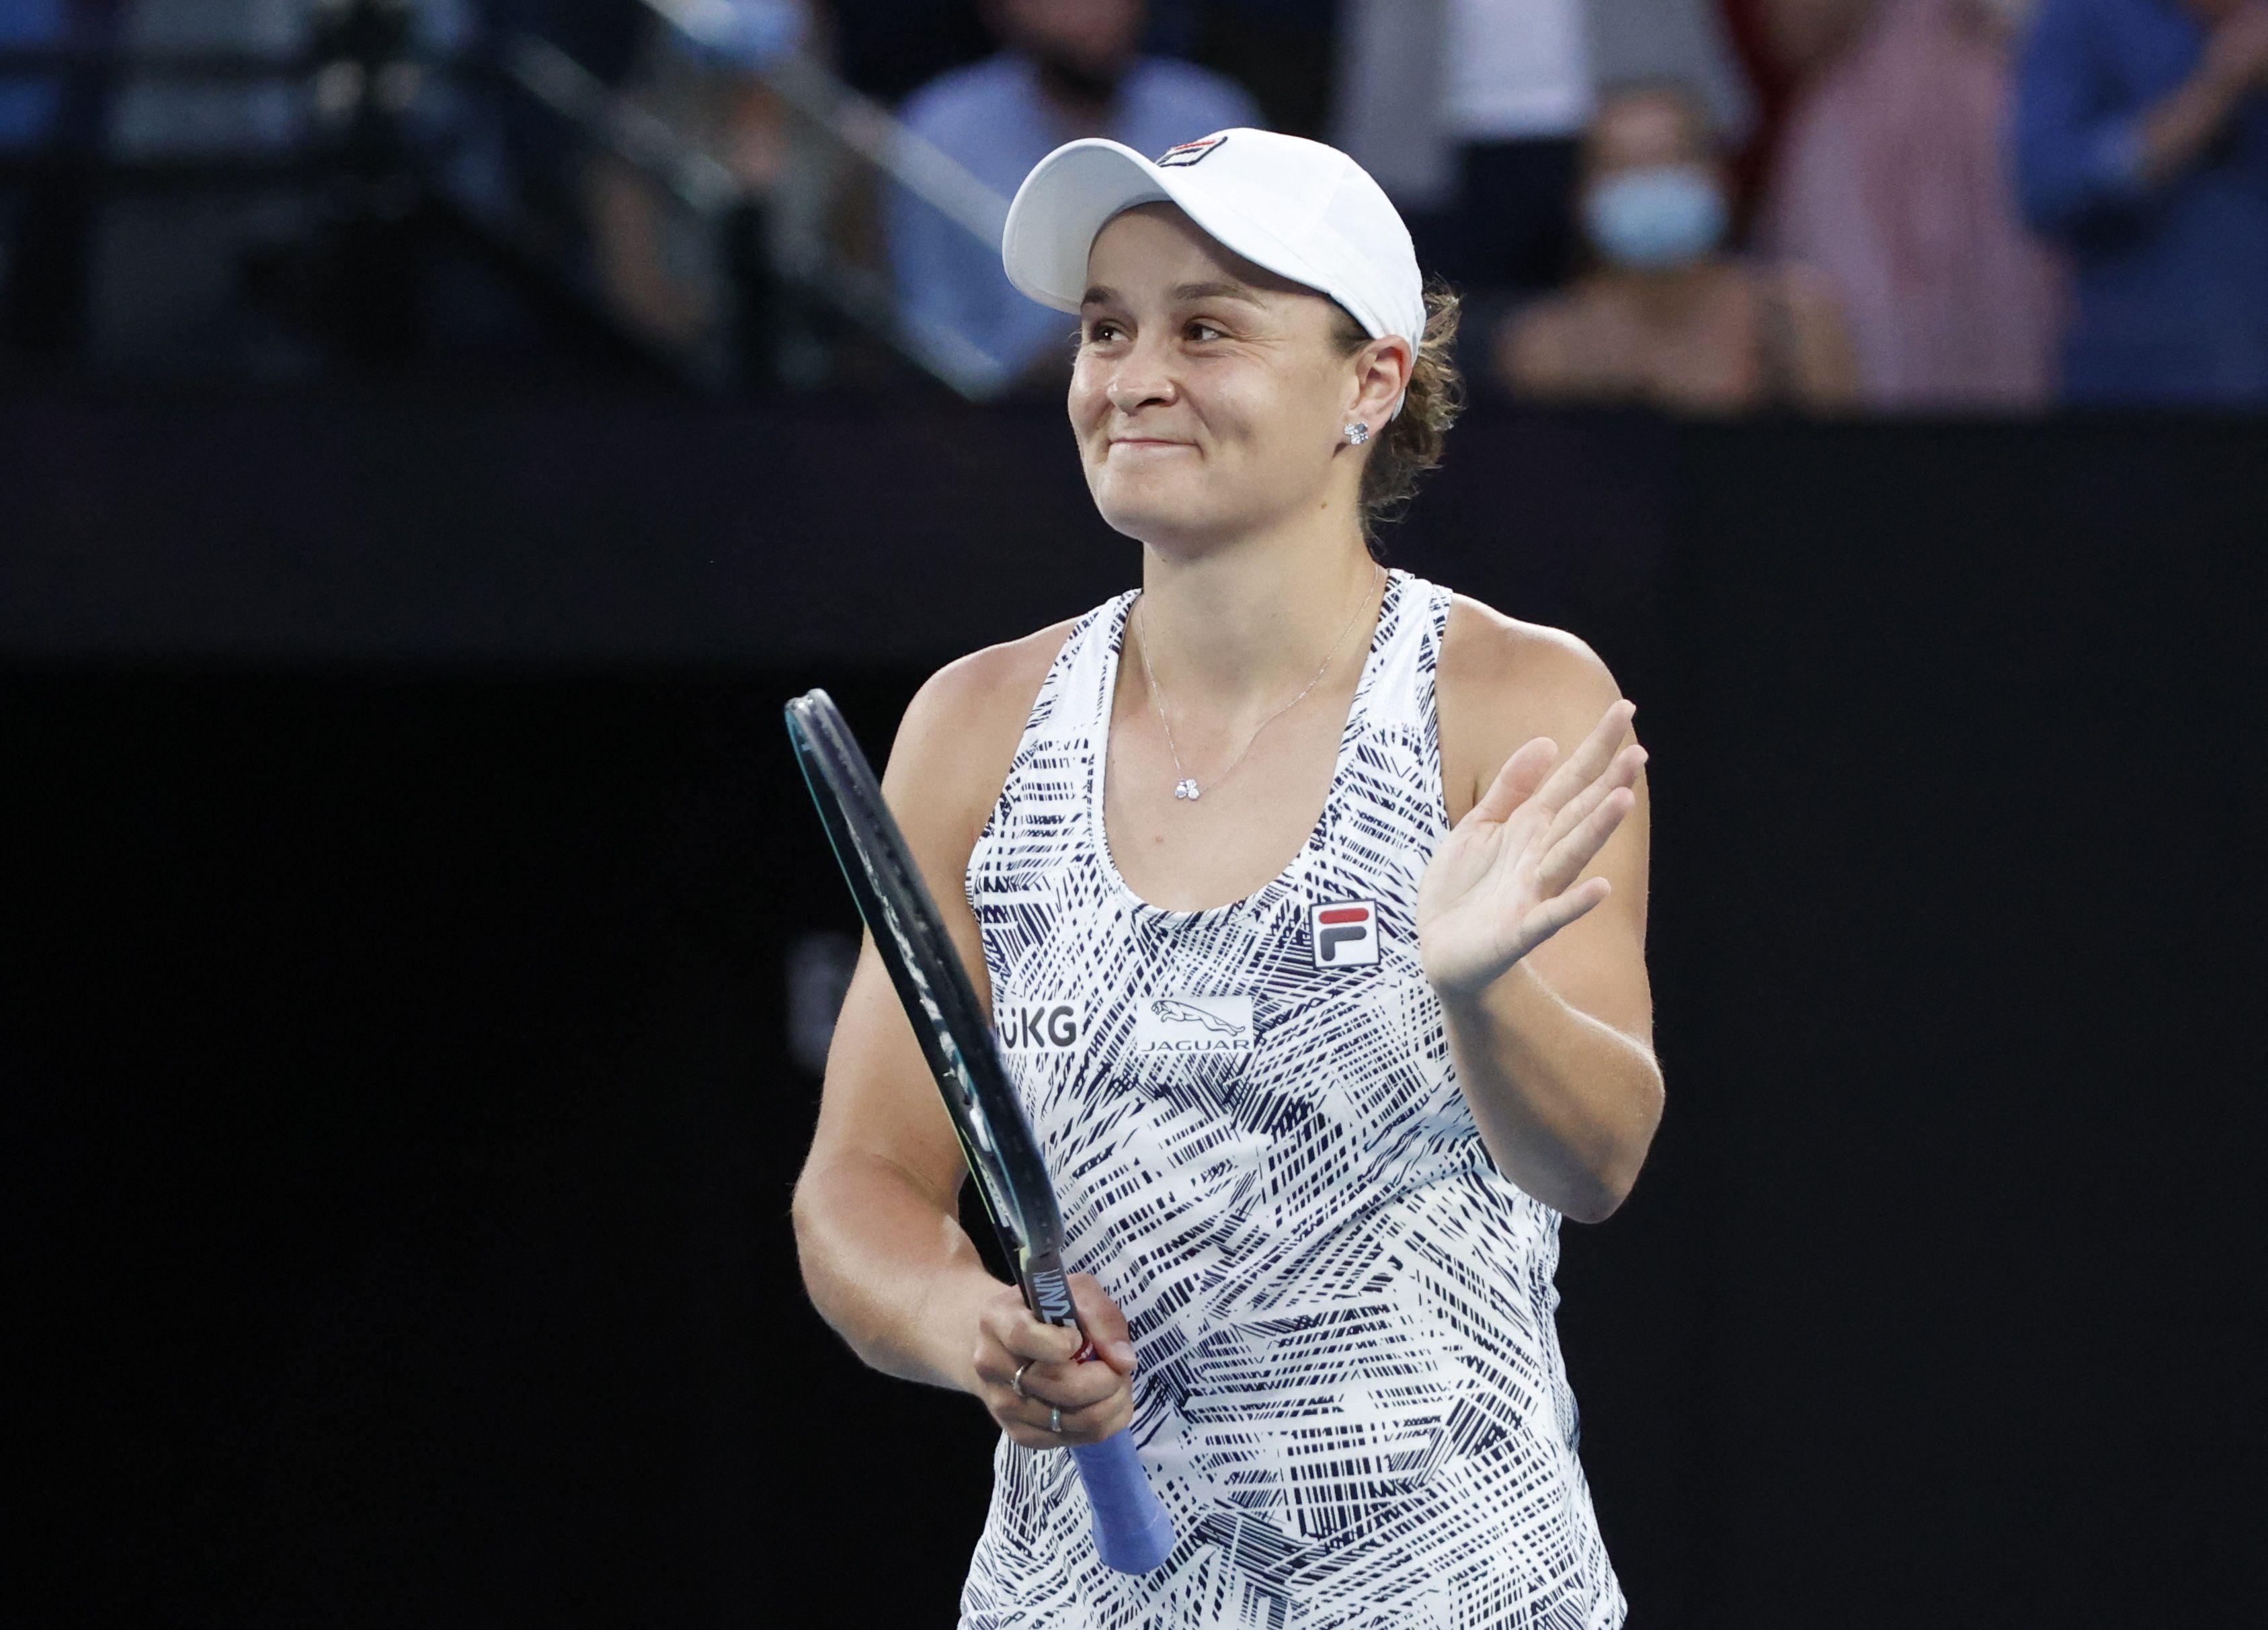 Top seed Ashleigh Barty breezes into quarterfinals at Australian Open GMA News Online